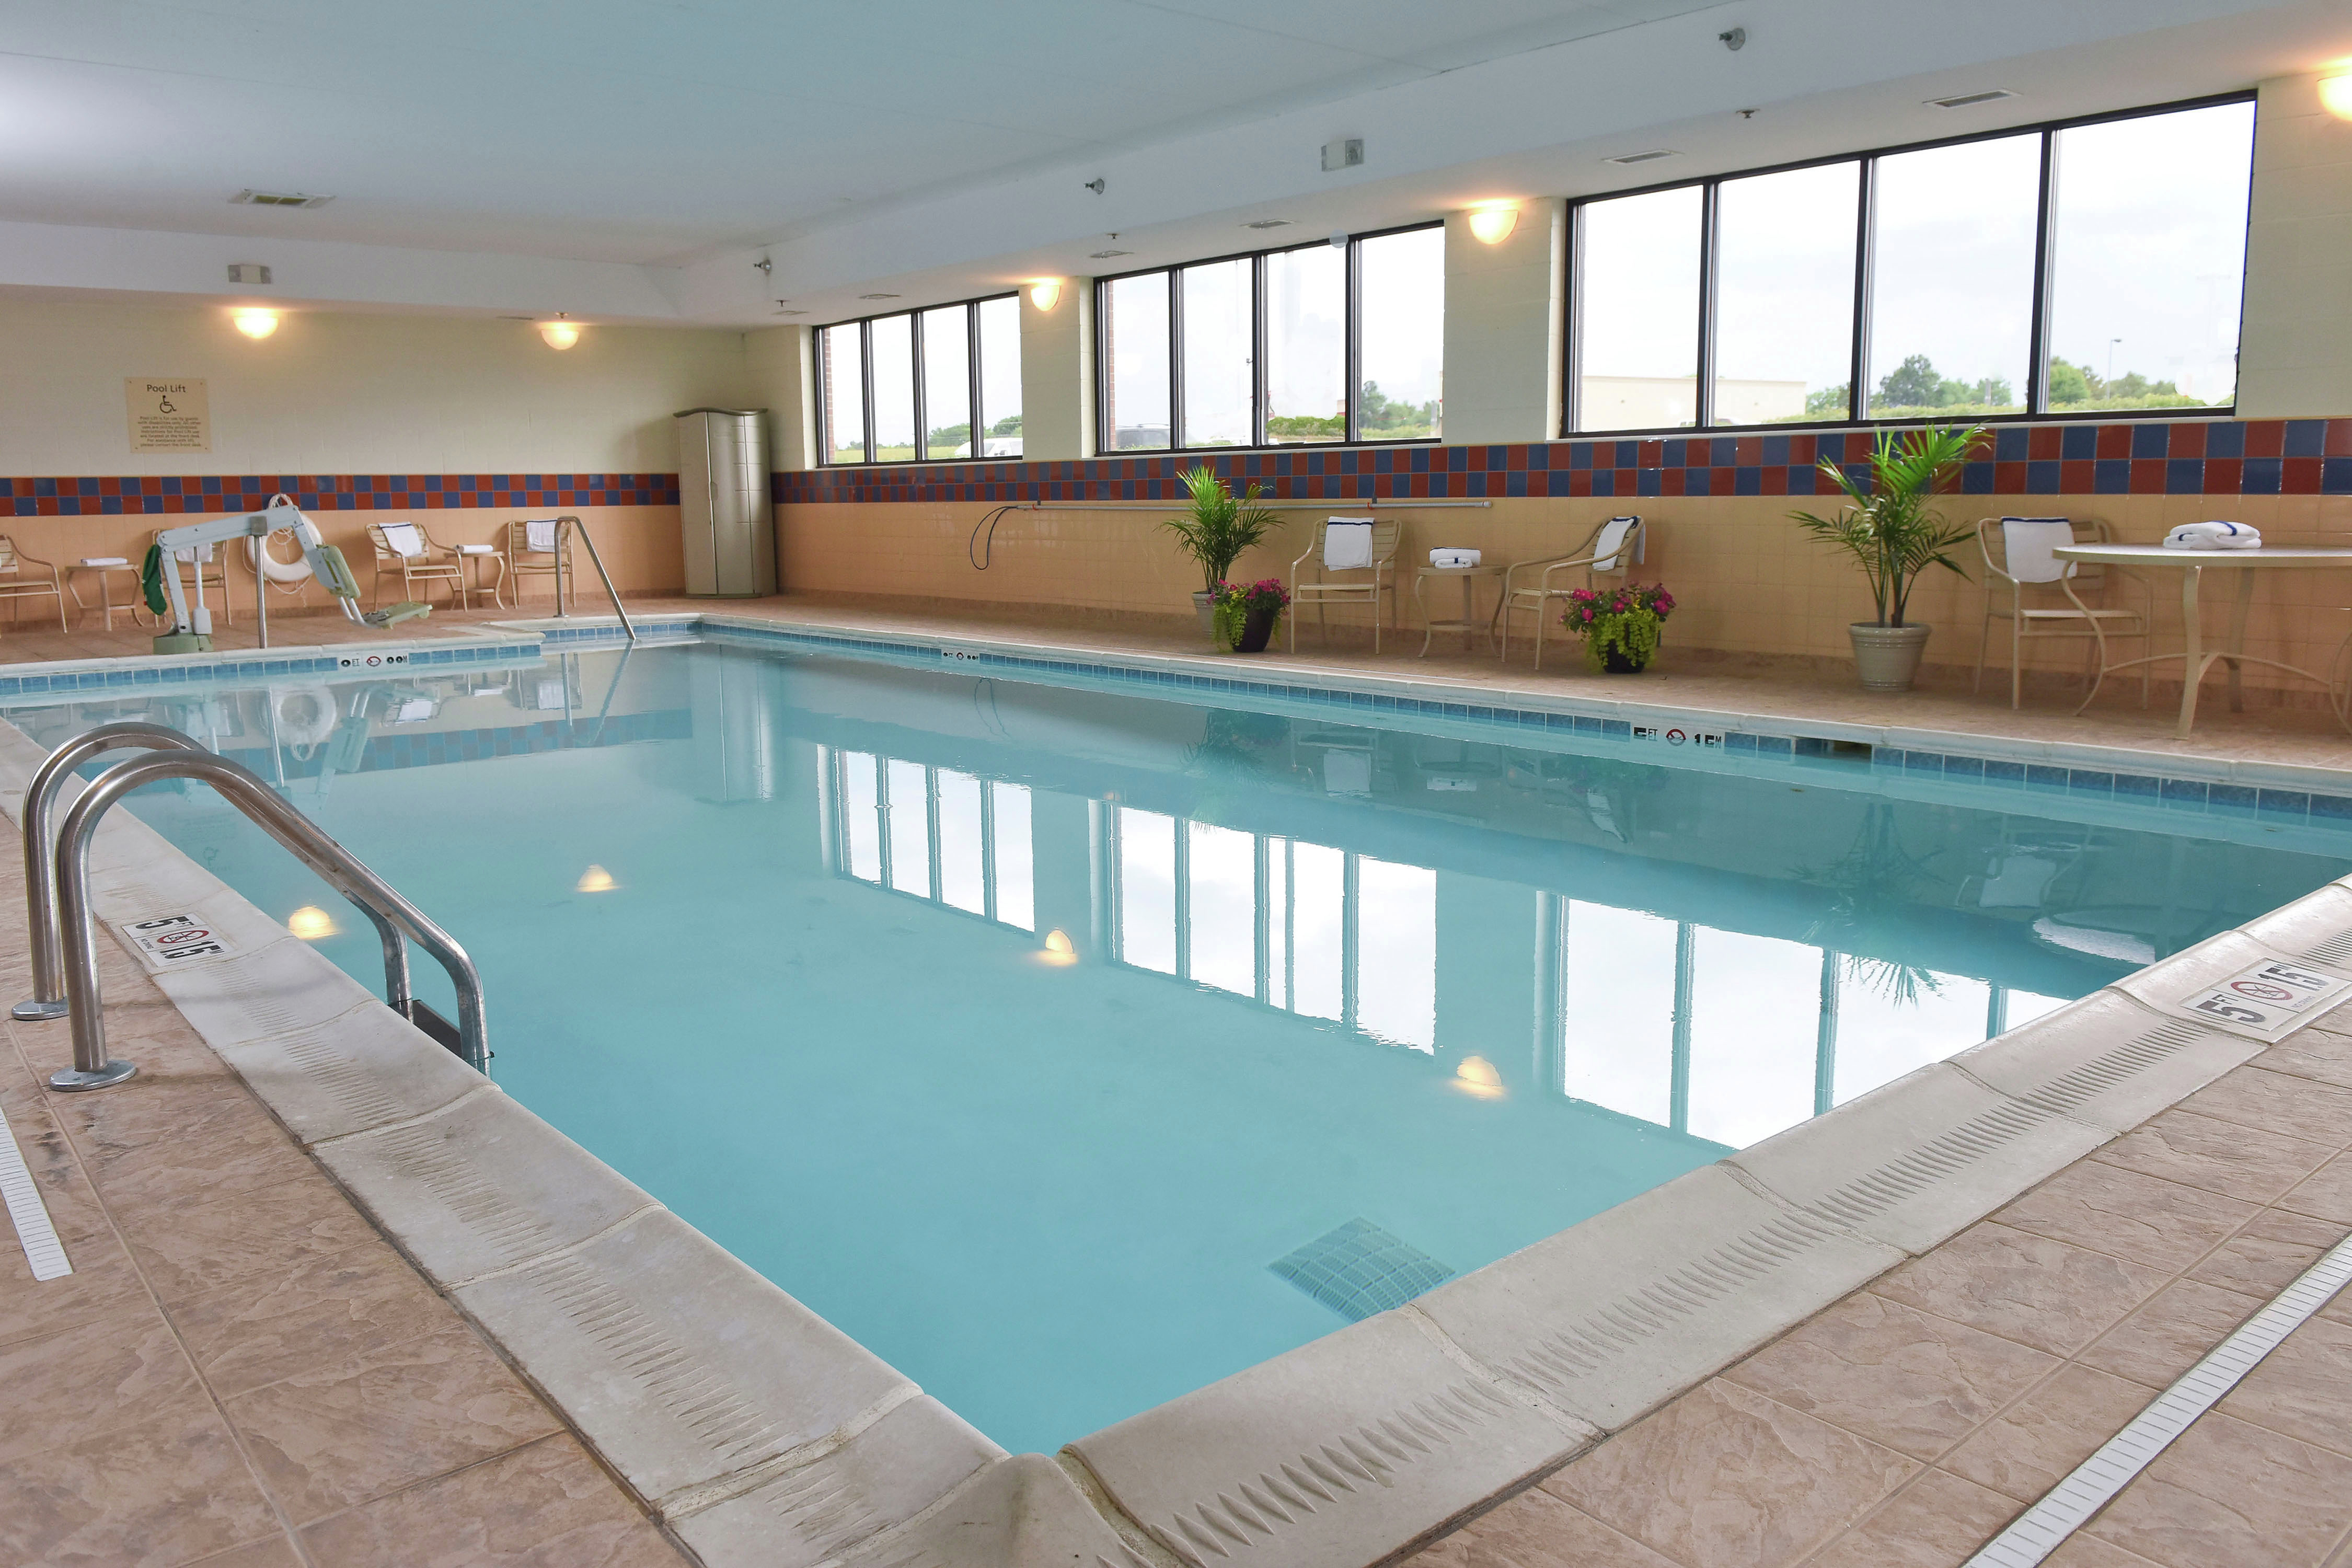 Take a dip in our indoor pool.